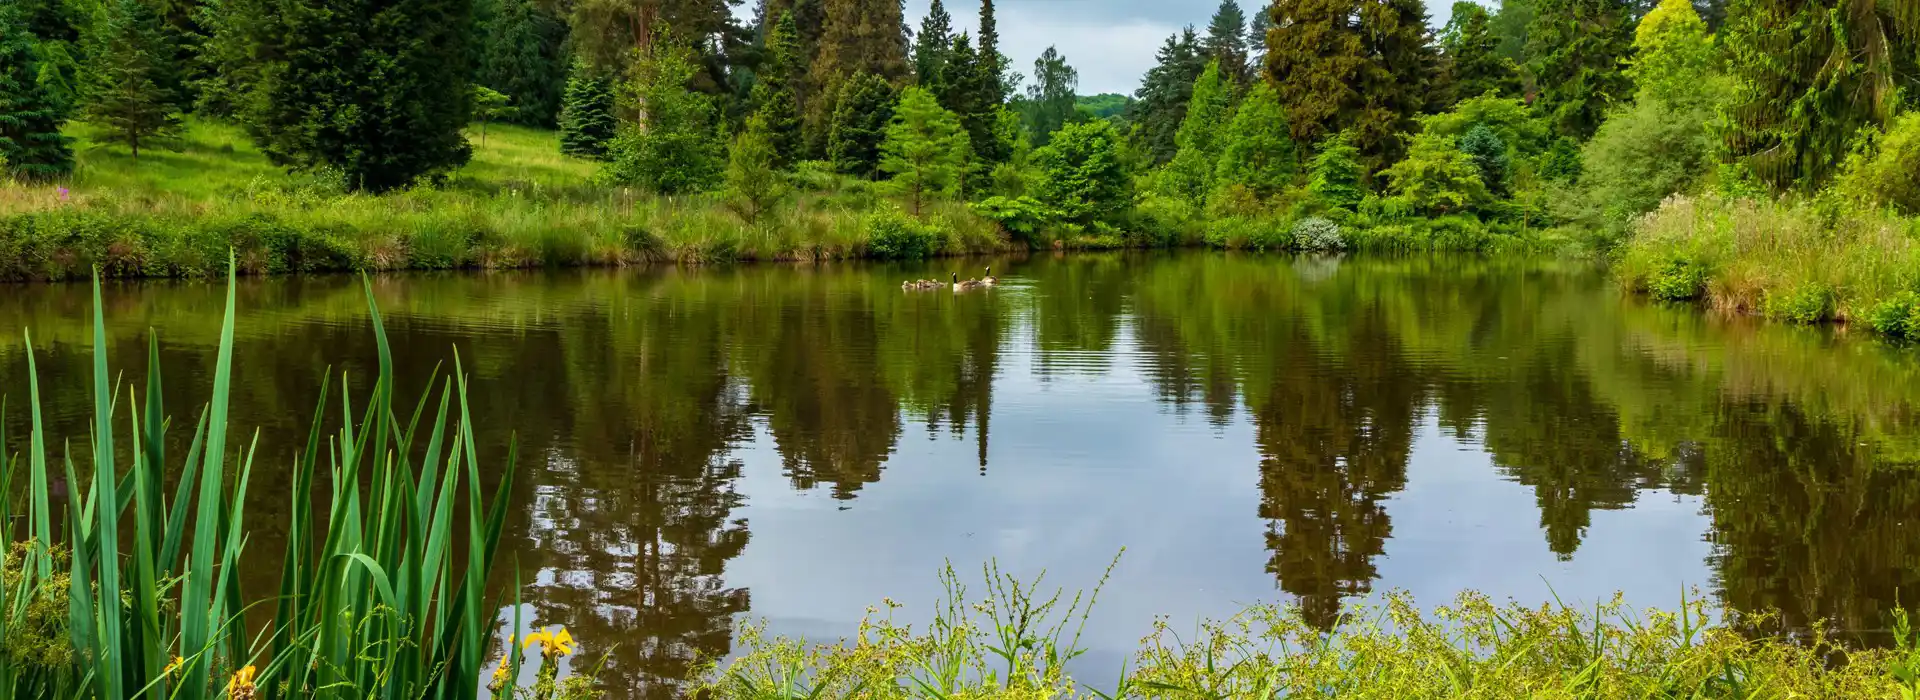 Bedgebury Pinetum and Forest